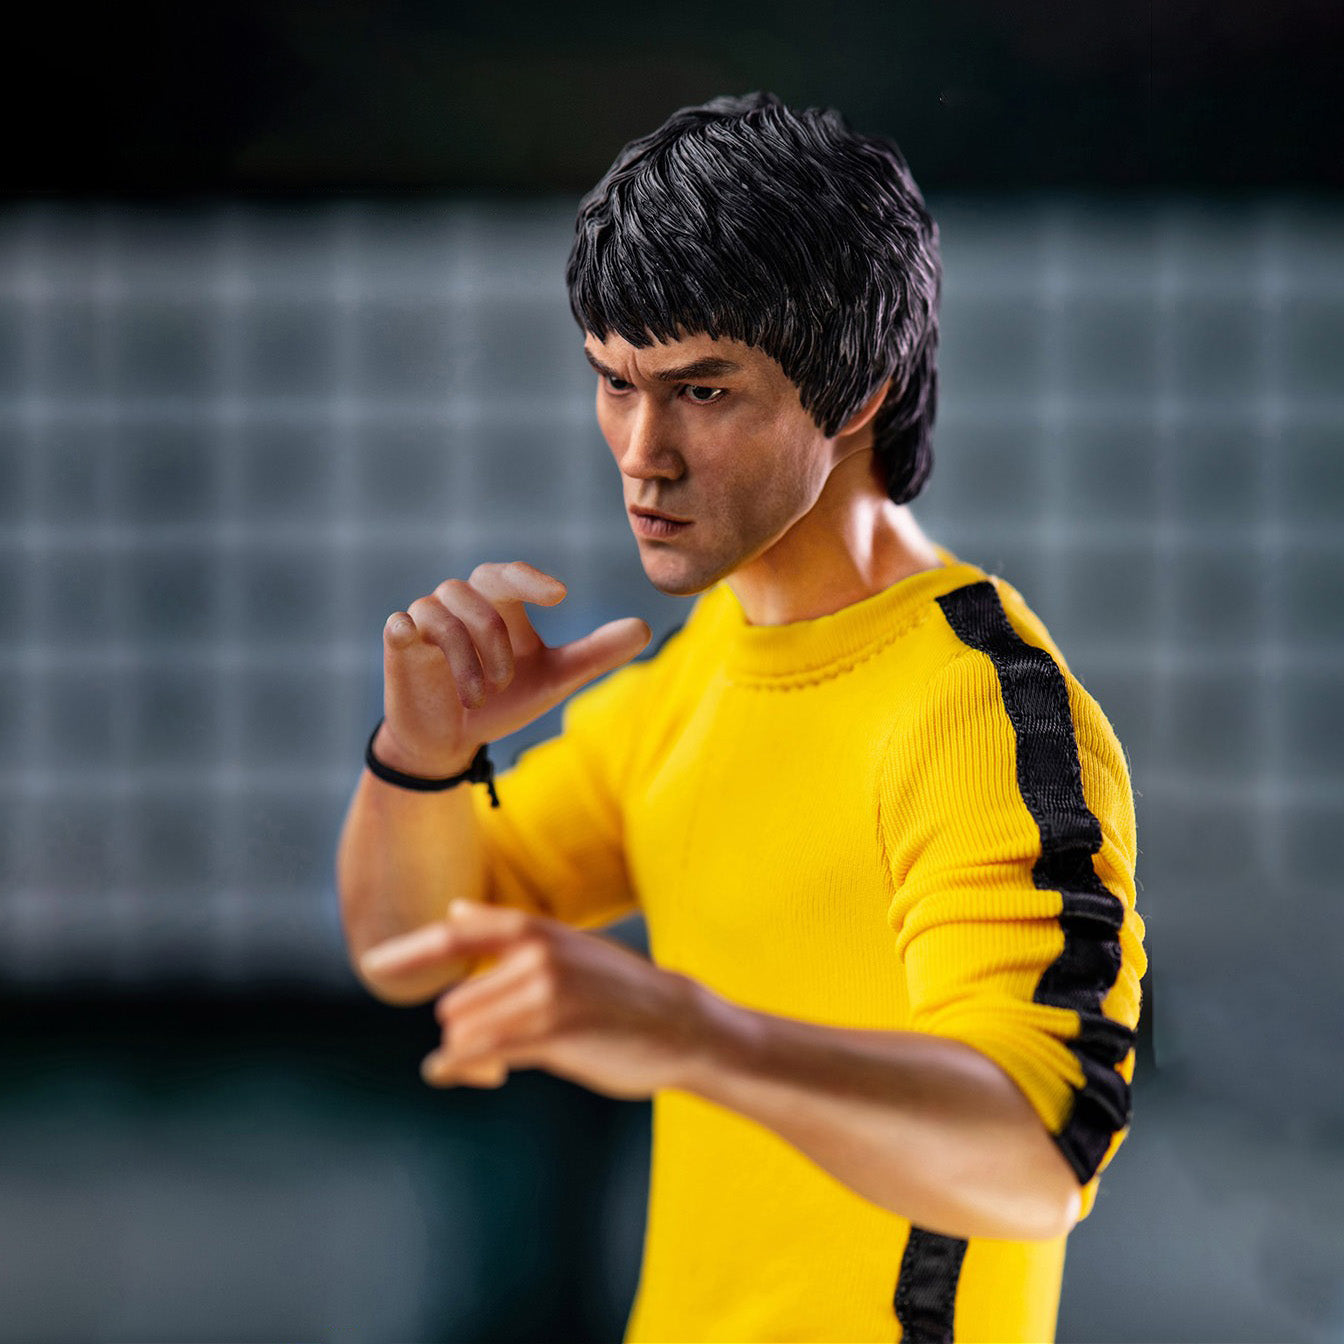 (IN STOCK) Star Ace Toys - Bruce Lee 50th Anniversary - Commemorative Statue (Deluxe ver.) (1/6 Scale)